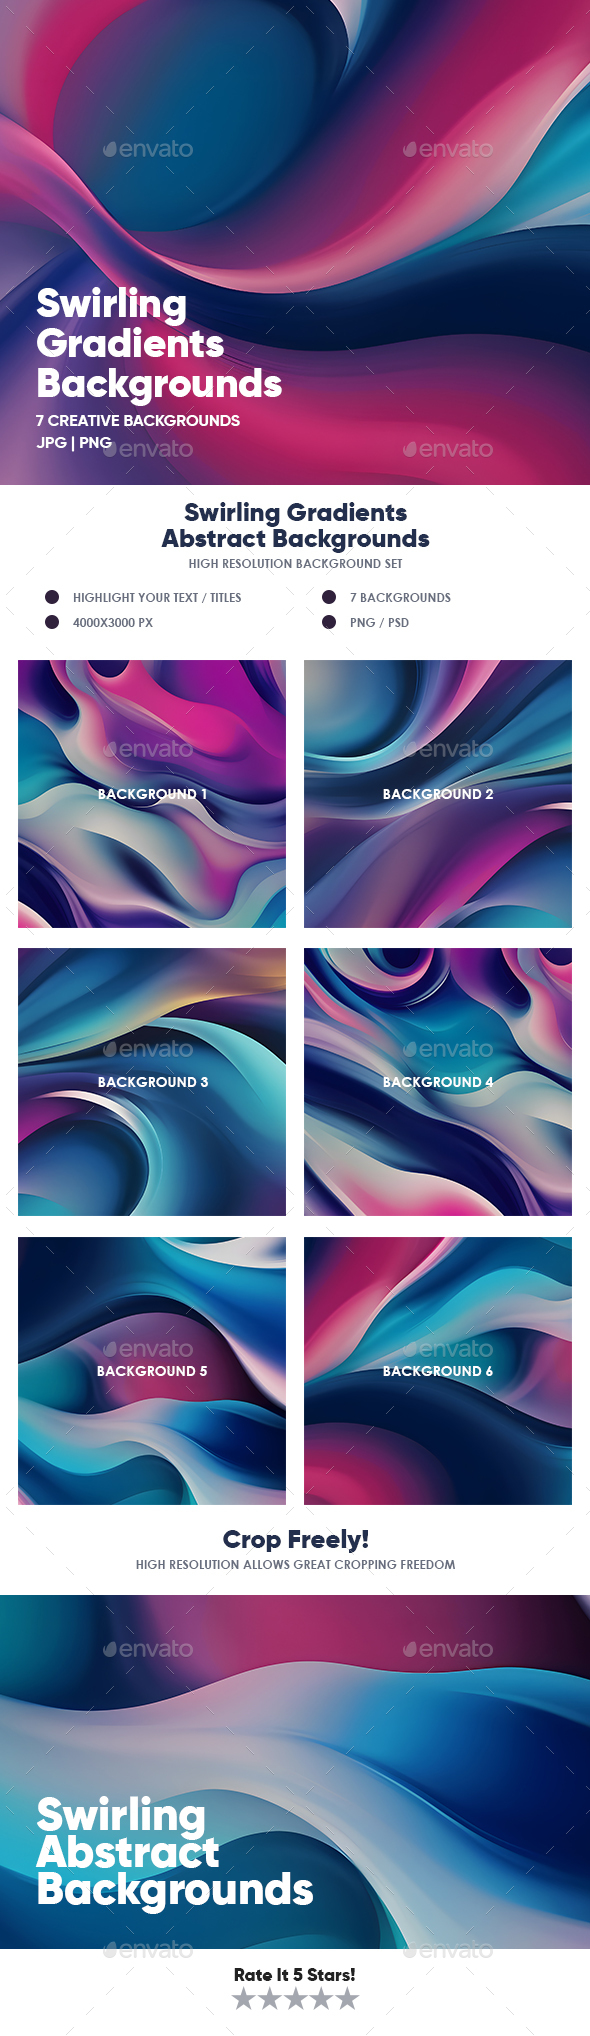 Swirling Gradients Abstract Backgrounds